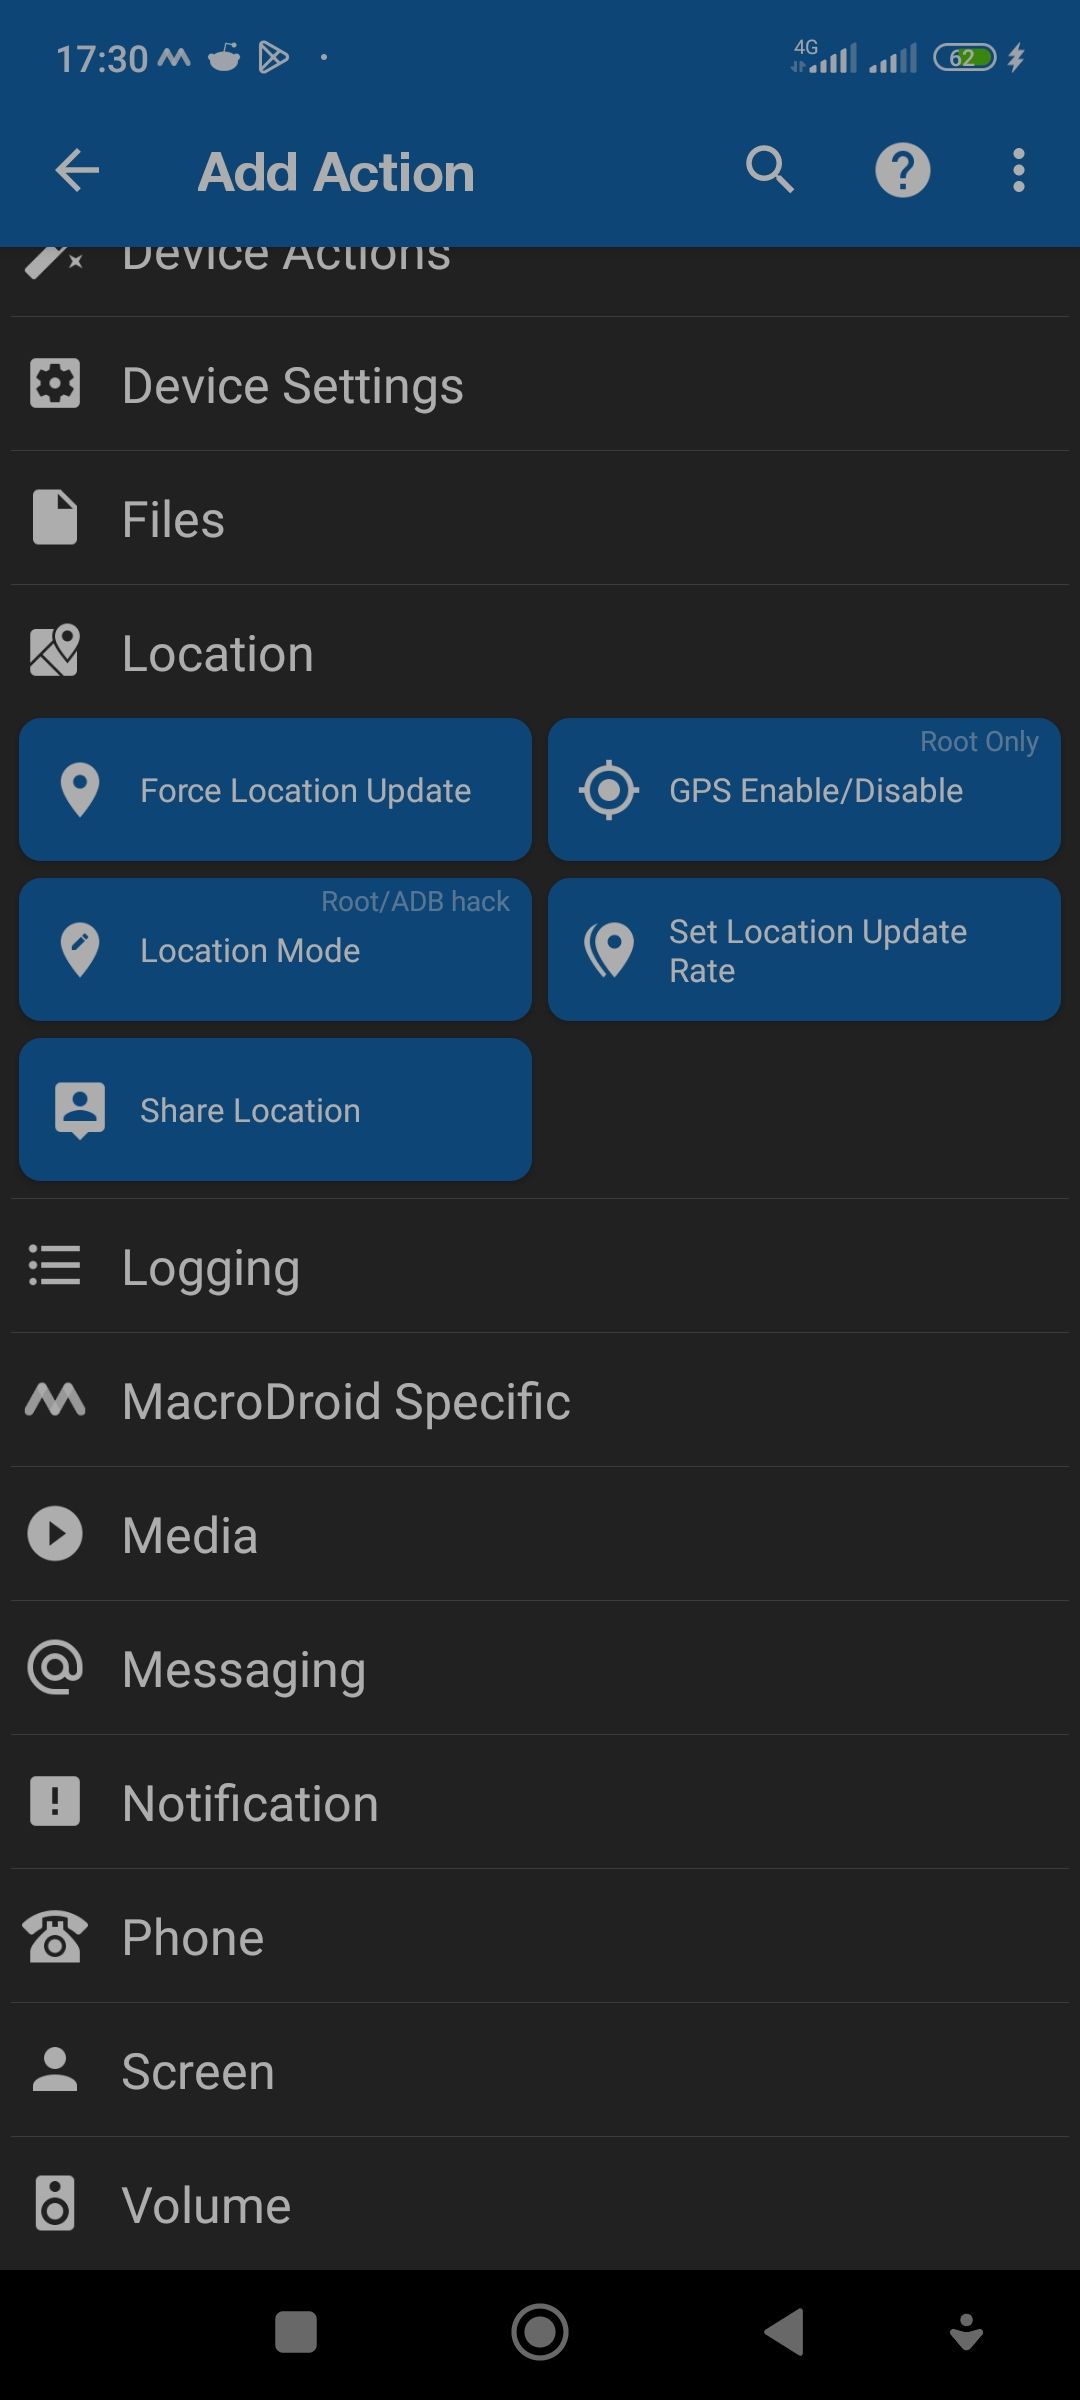 Configuring location actions in the MacroDroid app